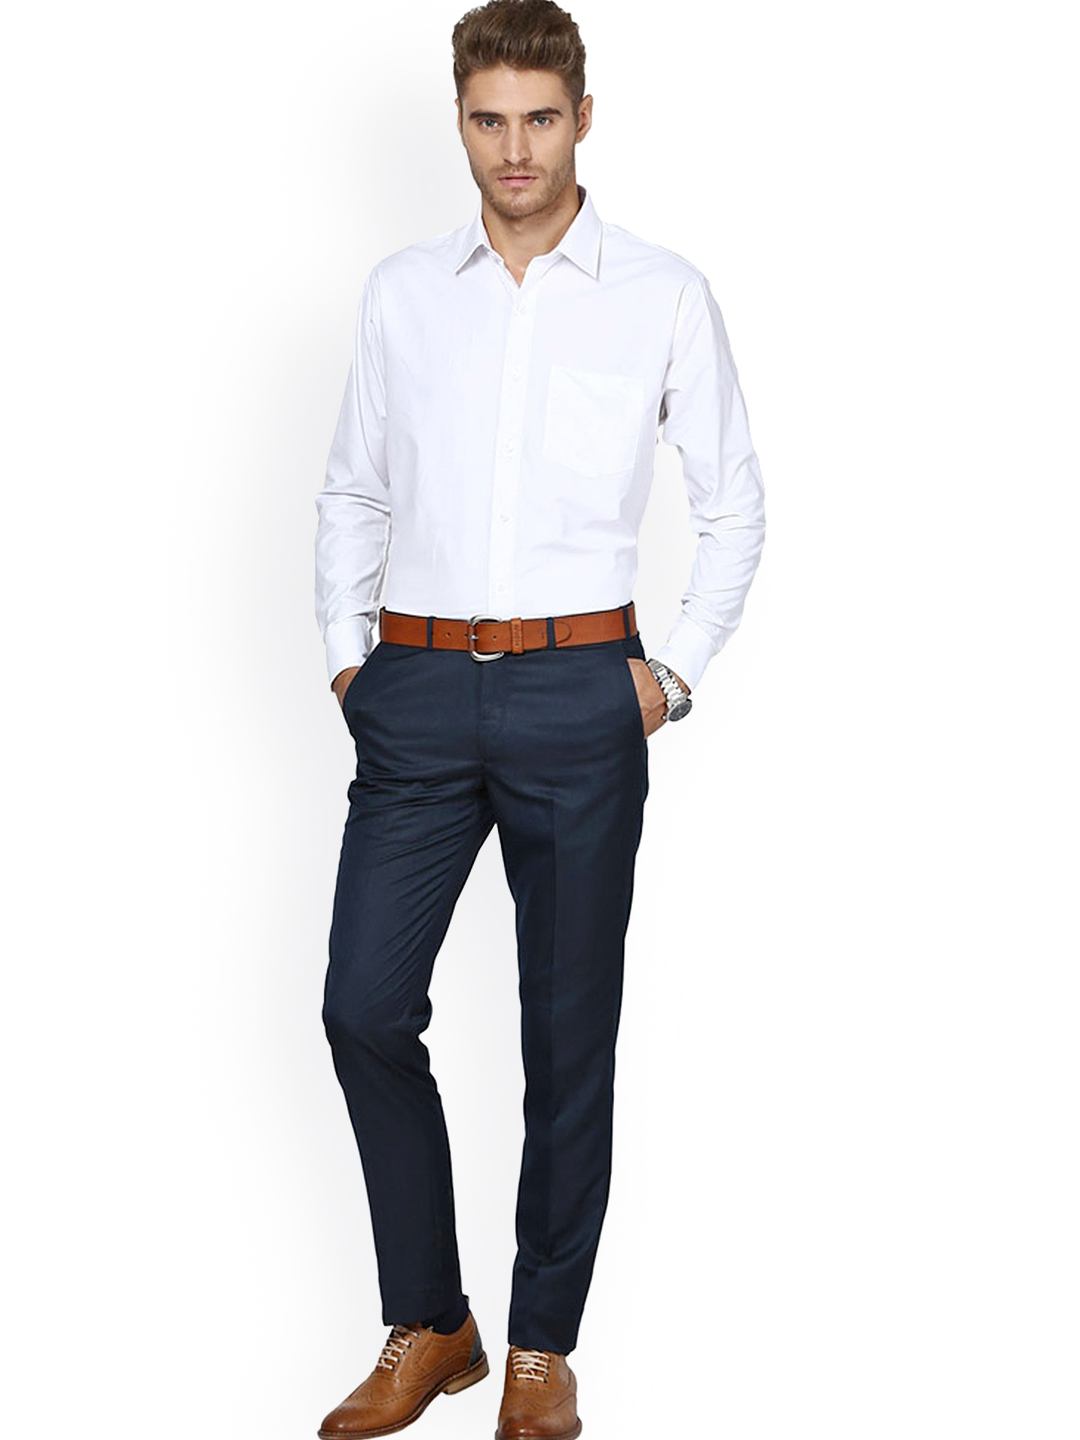 Classic Shirt And Jeans Combinations For Every Wardrobe